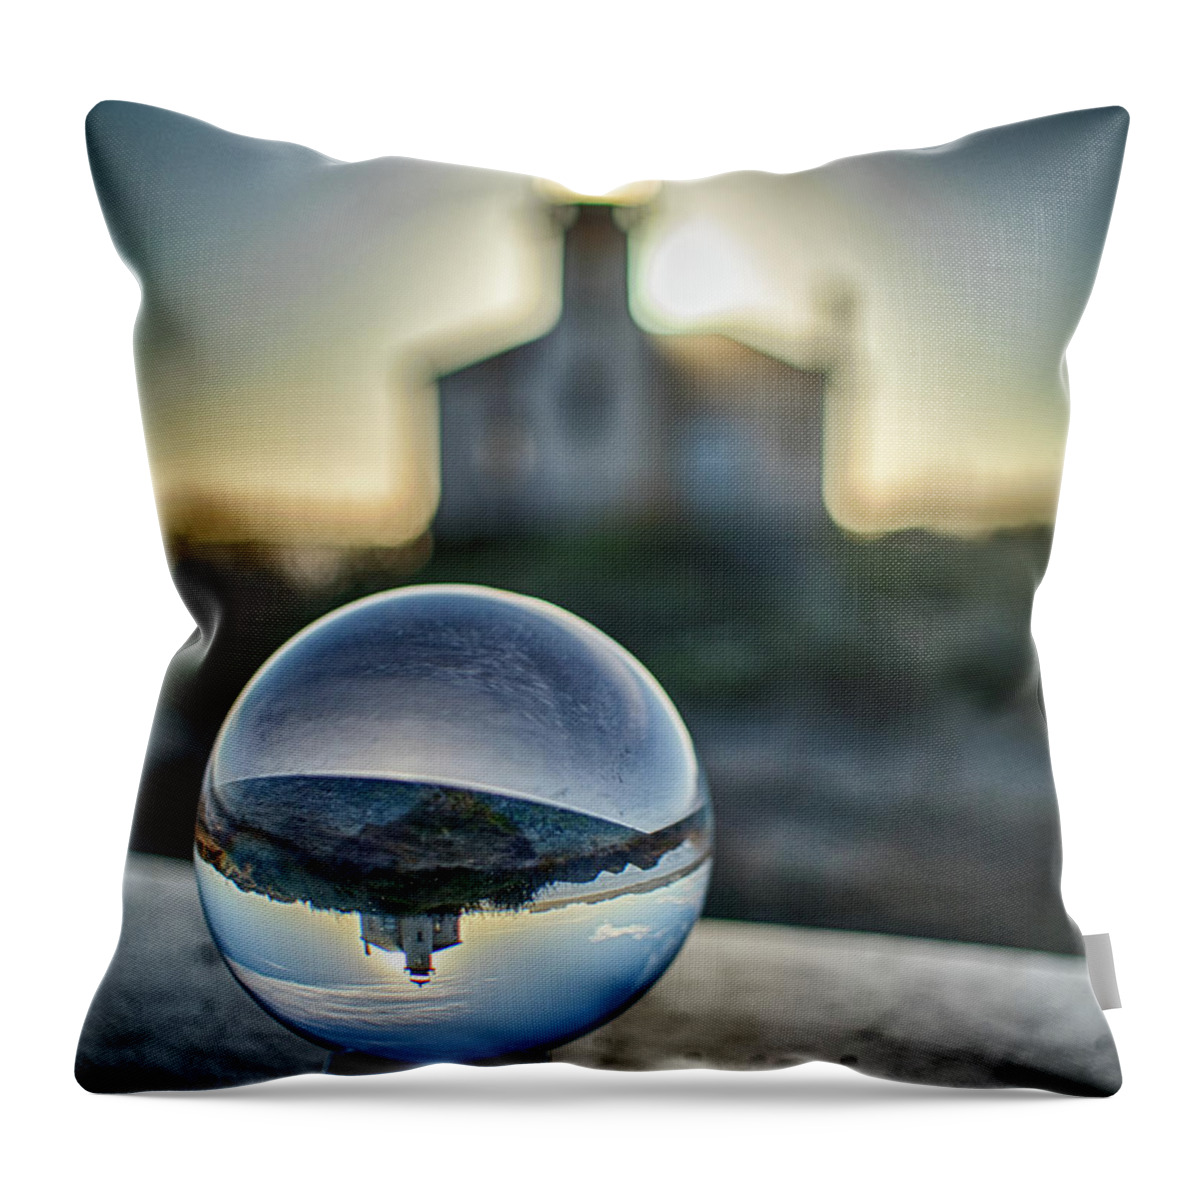 2018 Throw Pillow featuring the photograph The Upside Down by Gerri Bigler